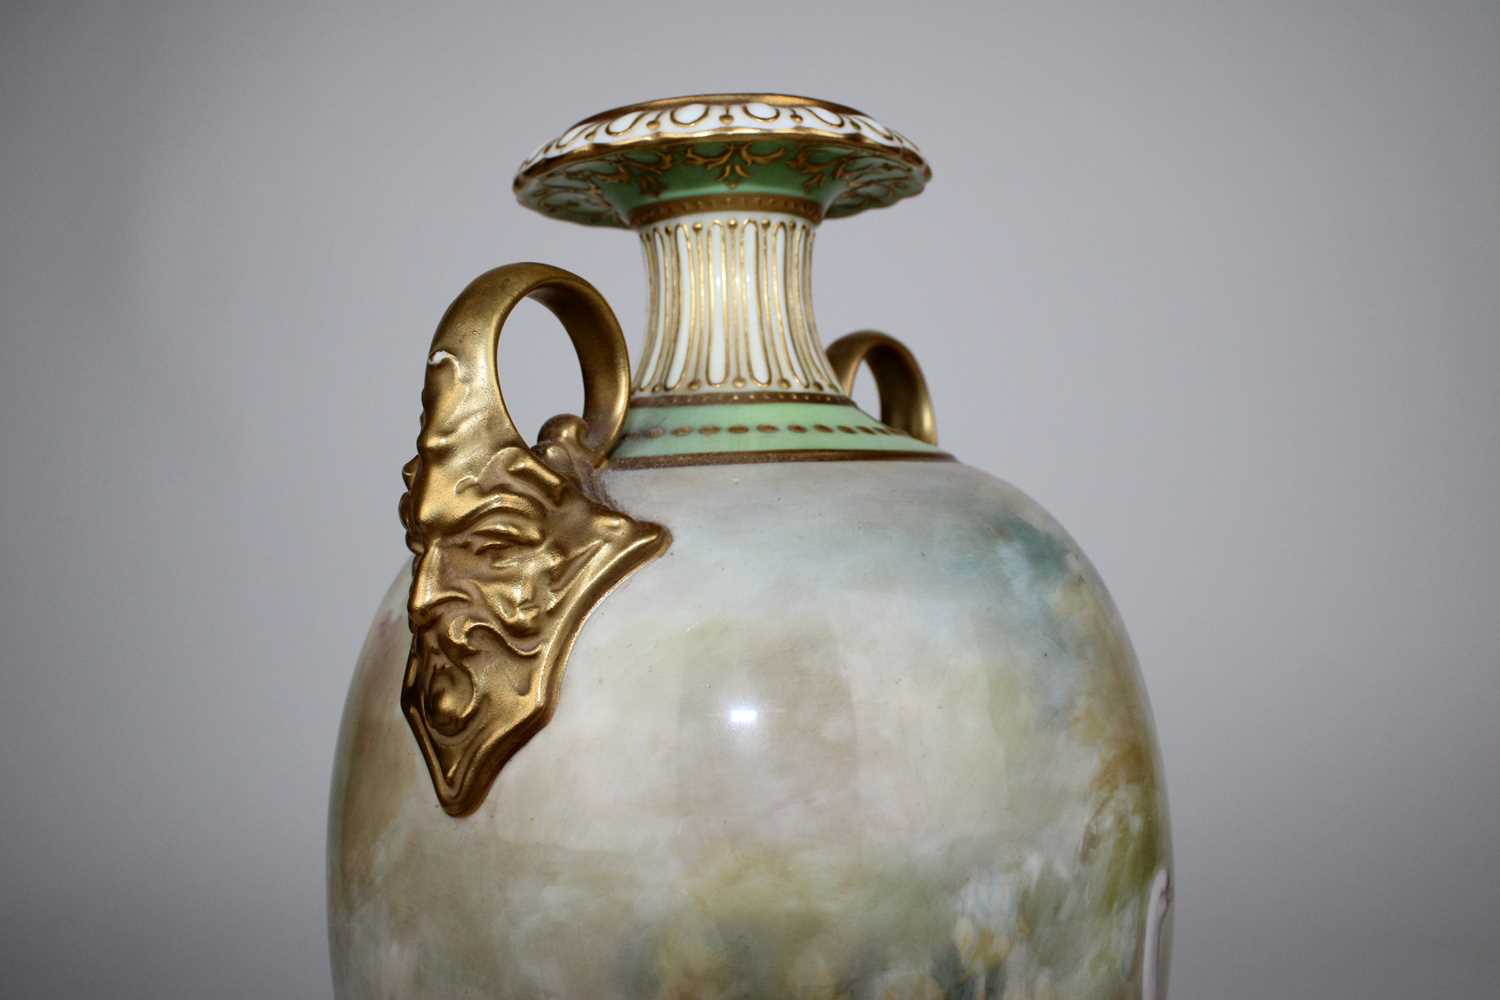 George White for Royal Doulton "Leda and the Swan" Urn - Image 15 of 20